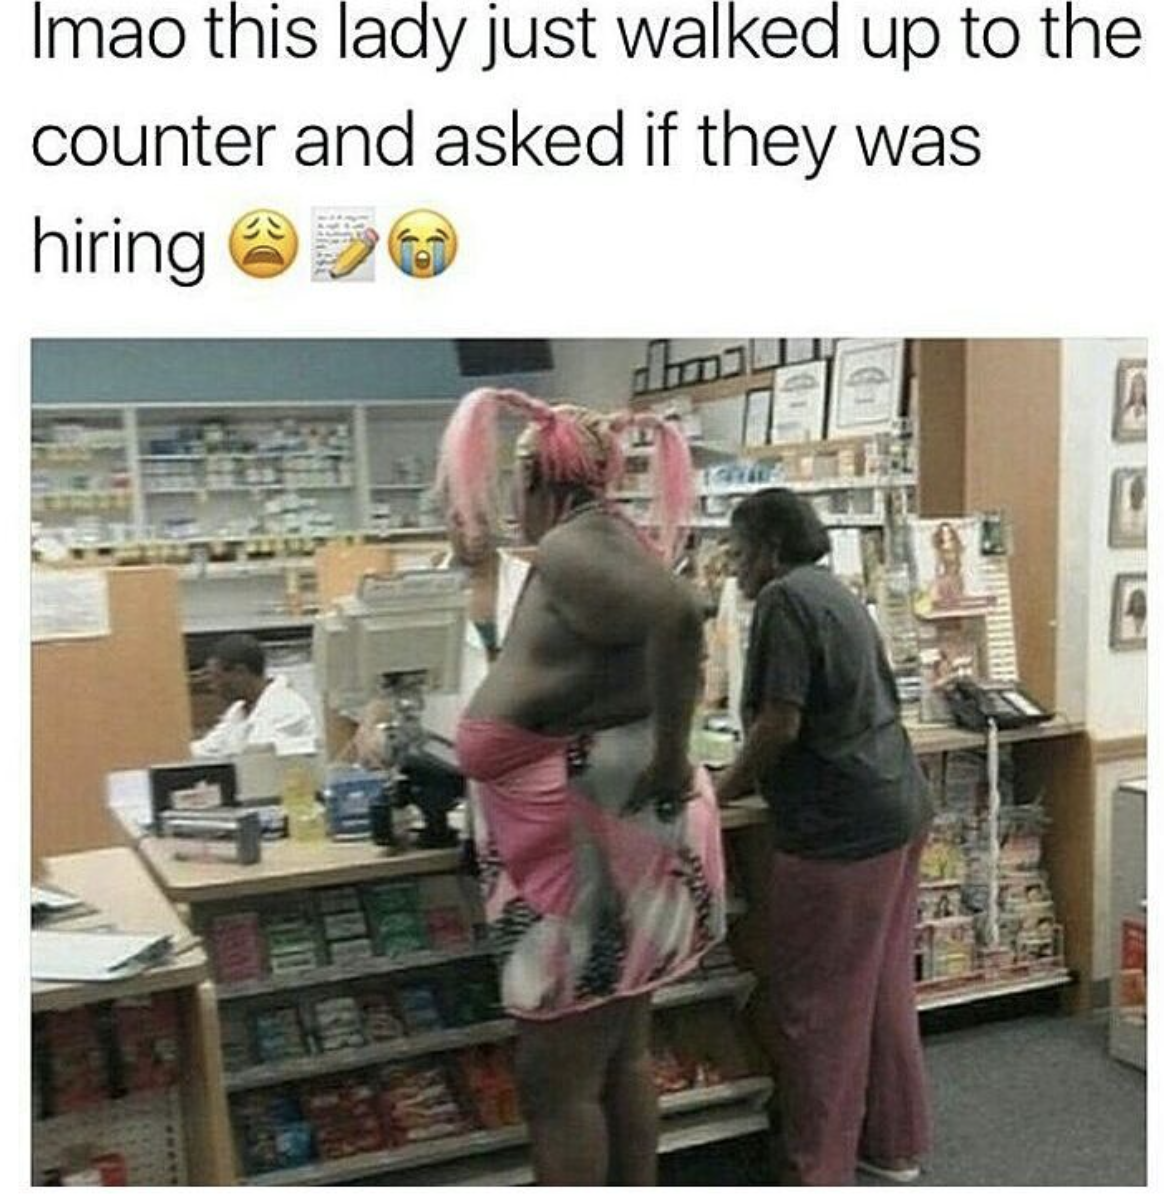 Funny large woman dressed in pink asking if they are hiring at a store